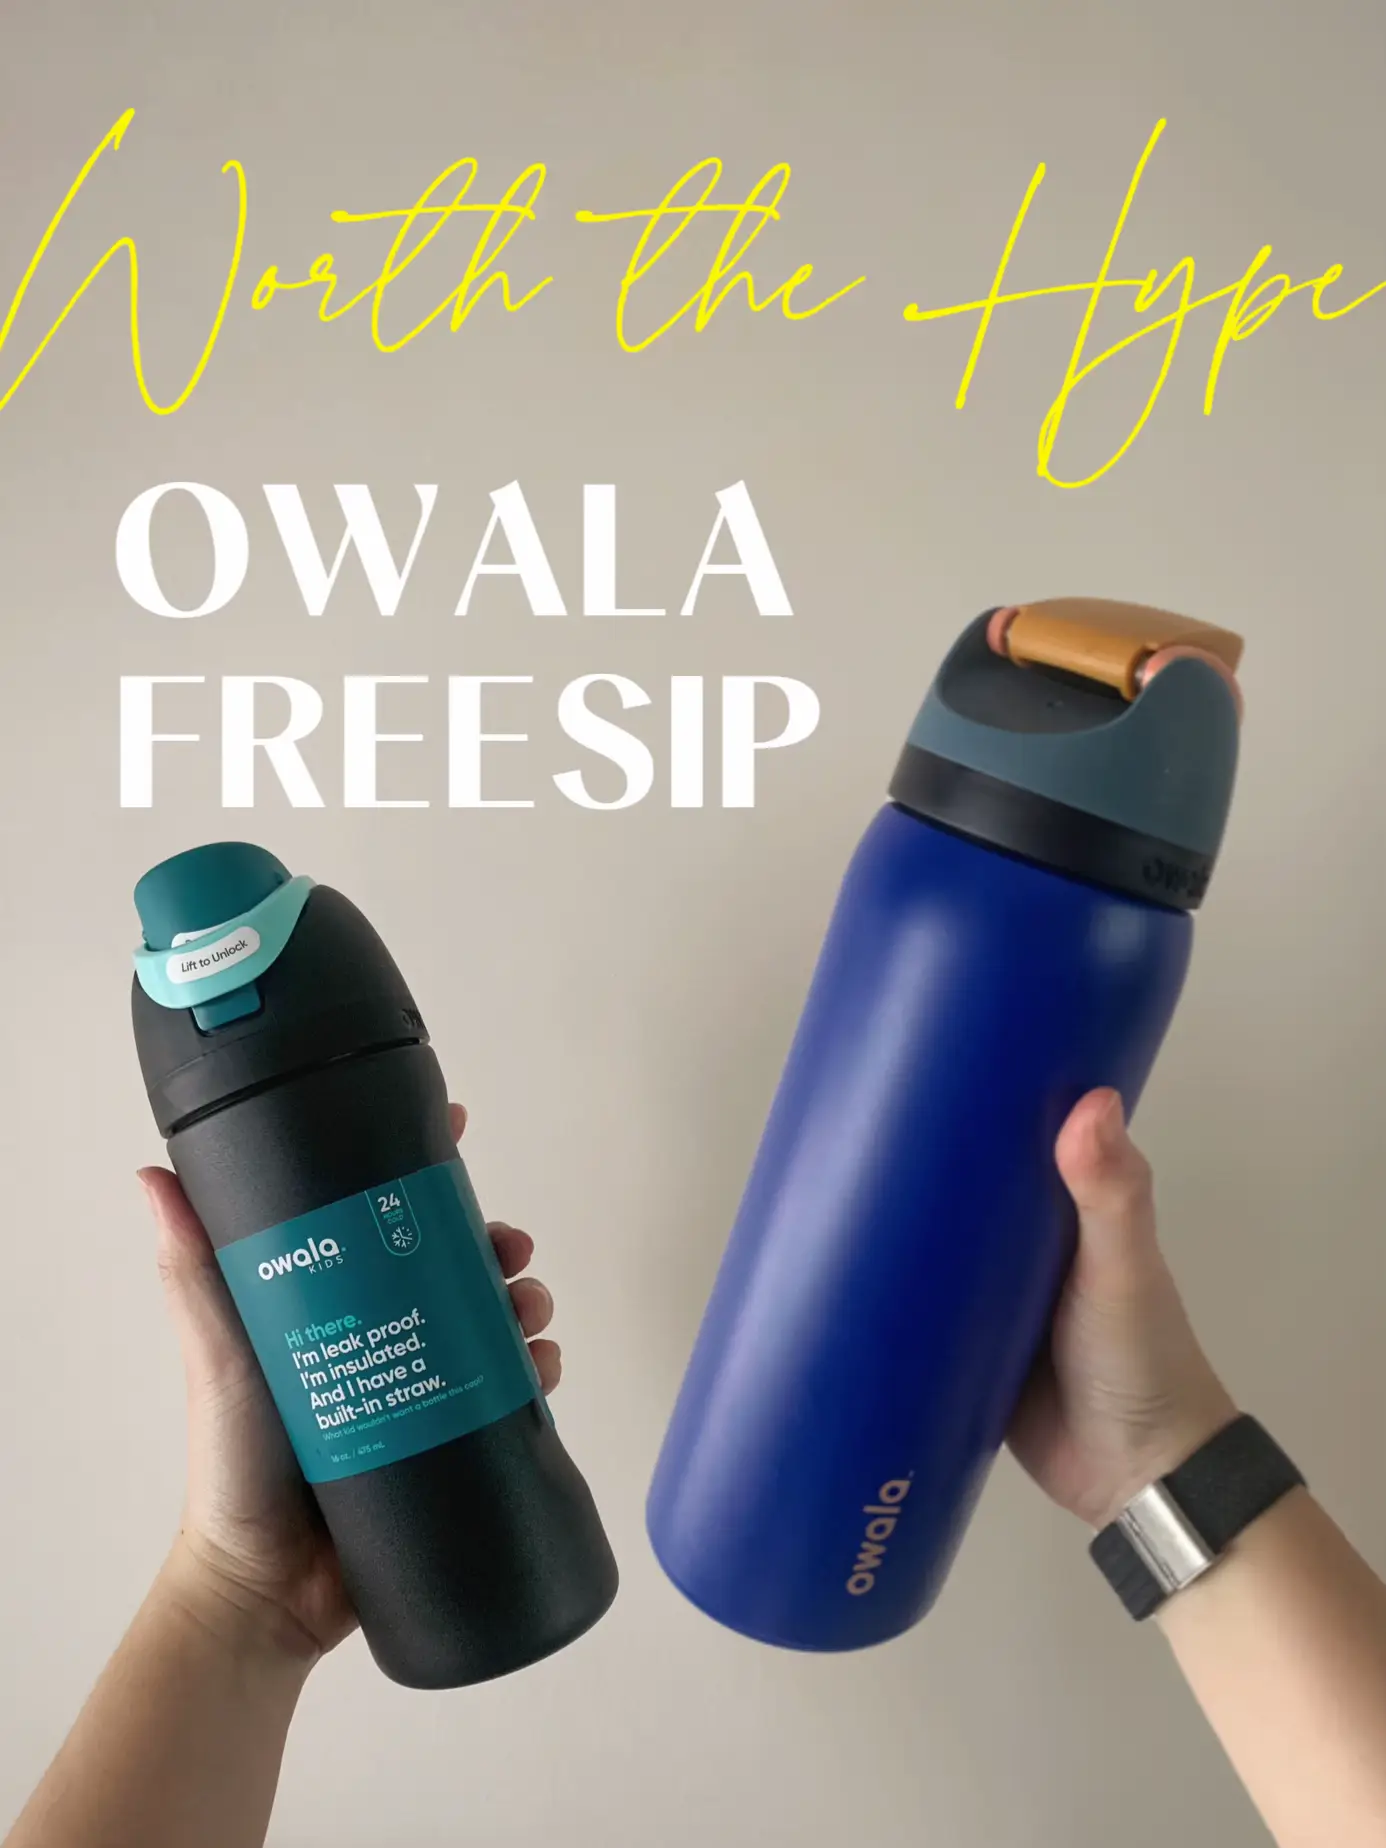 All the Owala Freesips lined up together (Plus the 40oz Tumbler) : r/Owala